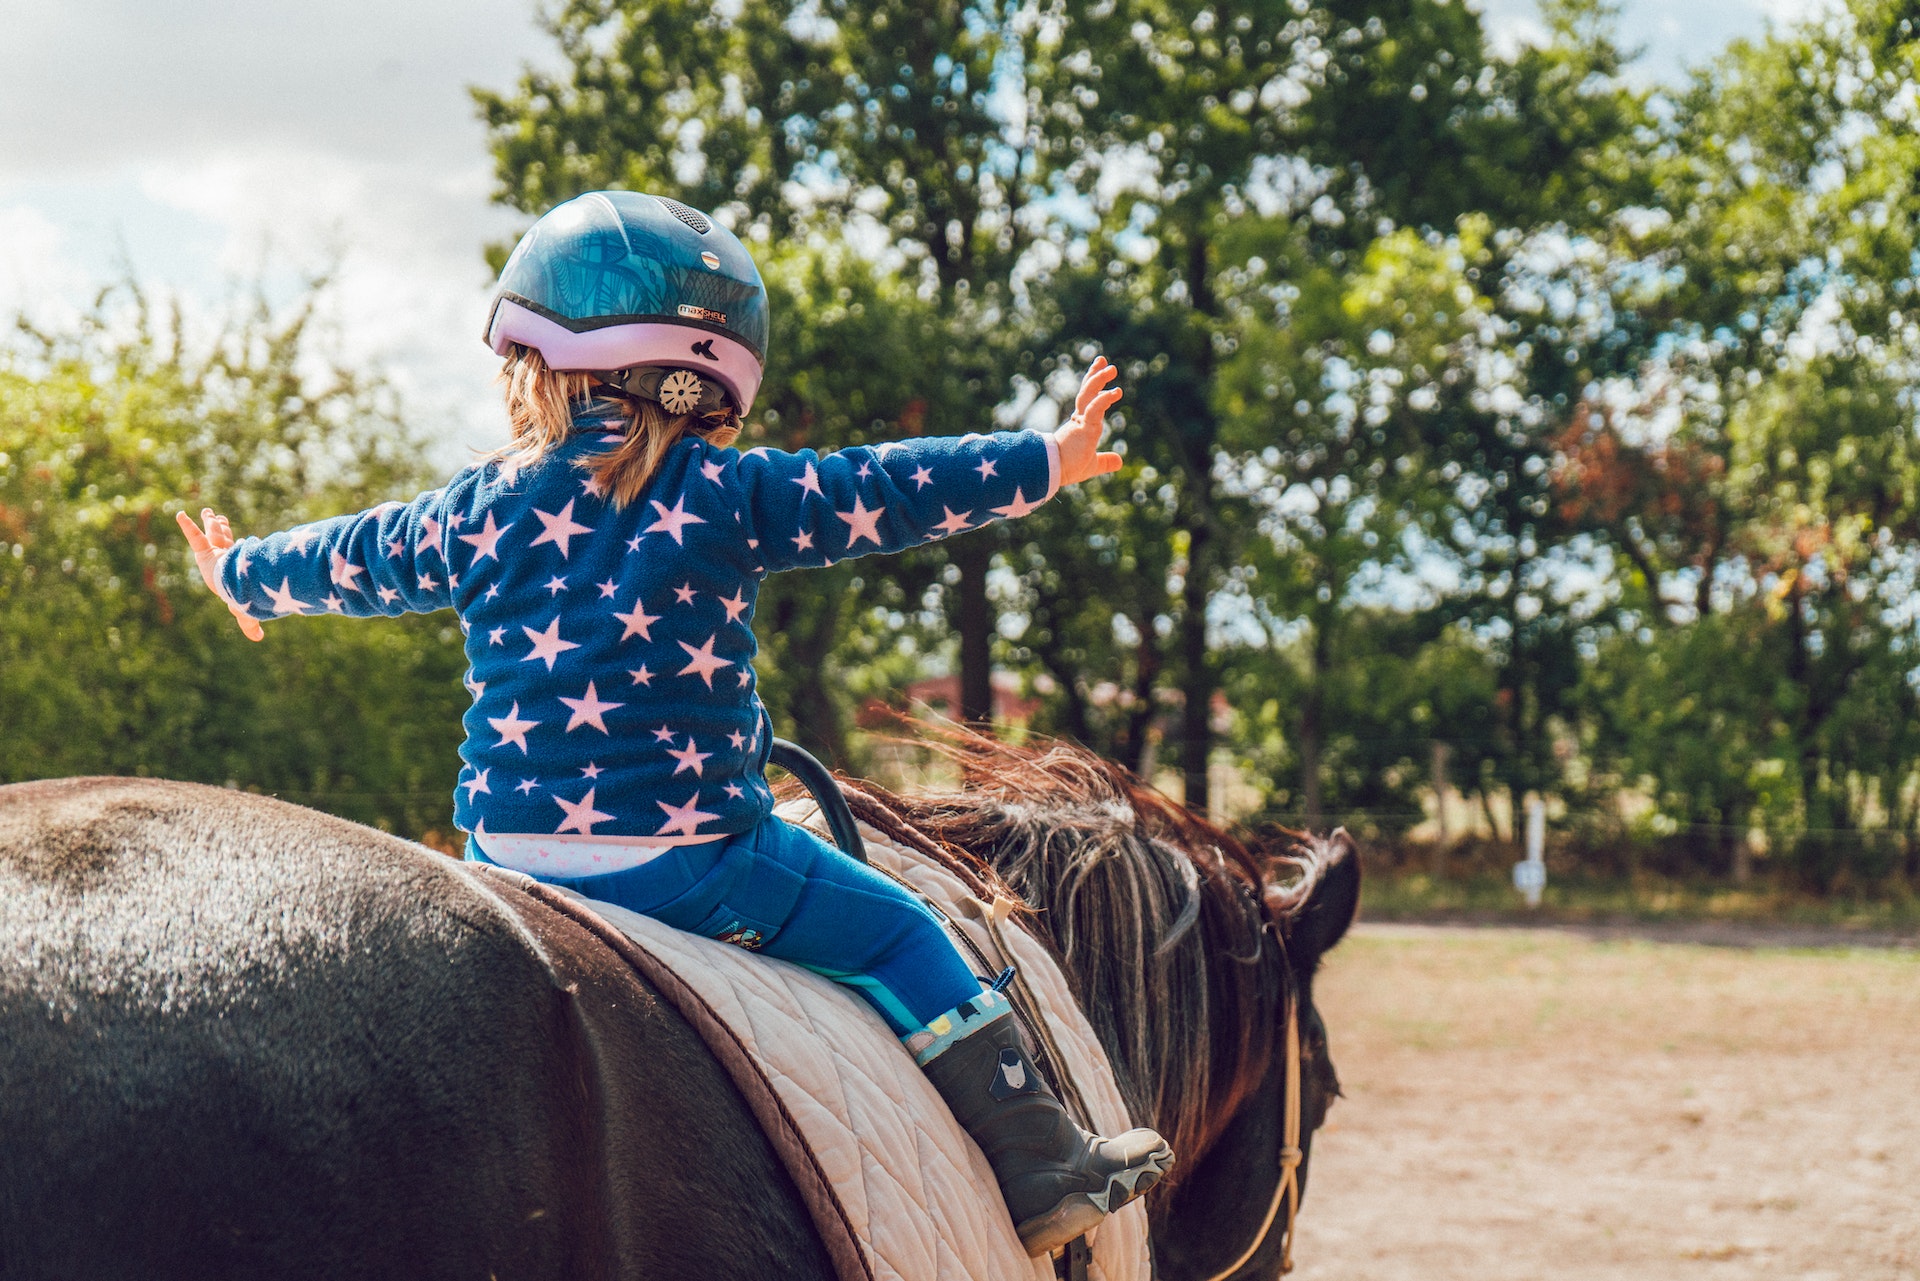 With friendly and knowledgeable staff and well-trained horses on the island, this is an experience you won't want to miss! Whether you're a beginner or a seasoned equestrian, The Stables has something for everyone. 